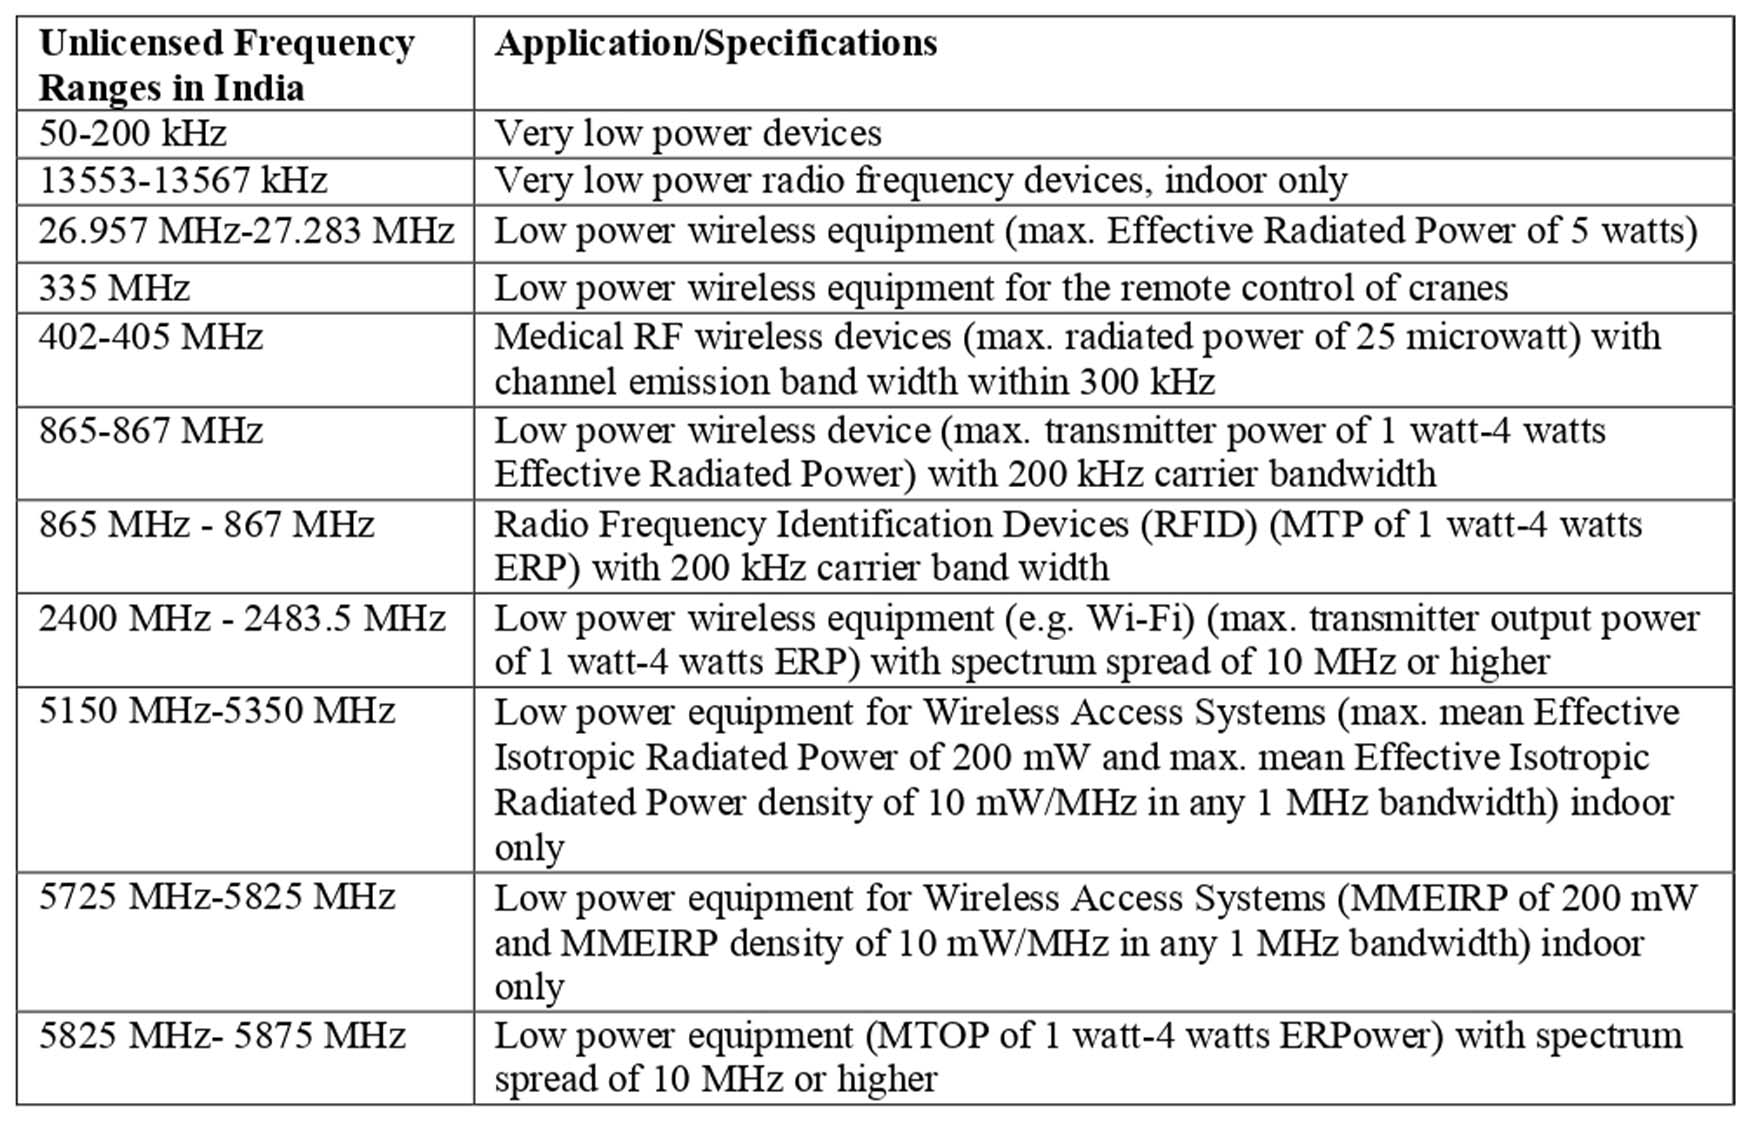 images/frequency chart listfor mandatory wpc eta approval